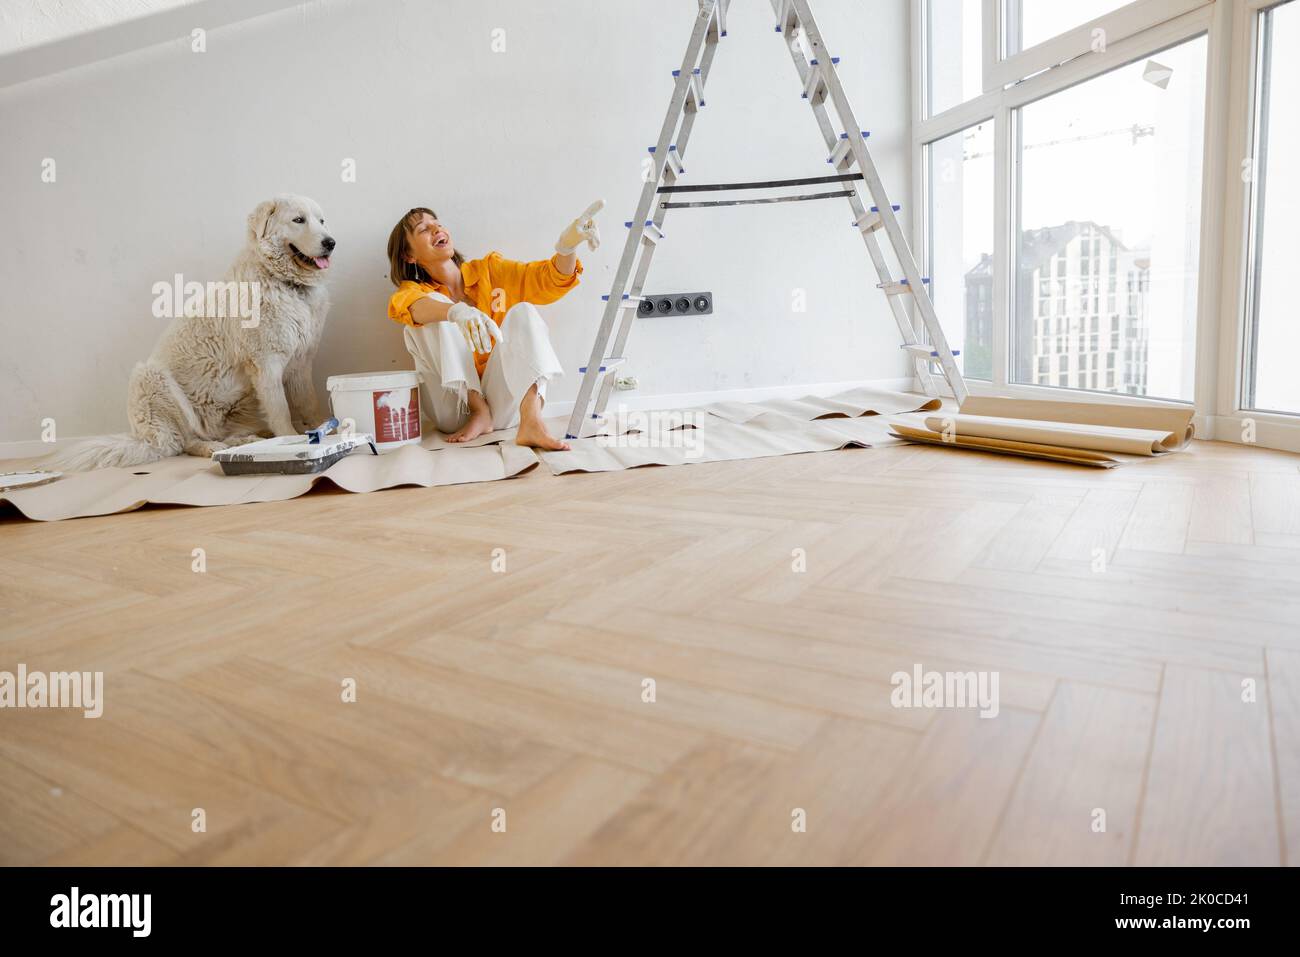 Young woman sits with her dog in room while making repairing in apartment. Repair and house renovation concept, friendship with pet Stock Photo